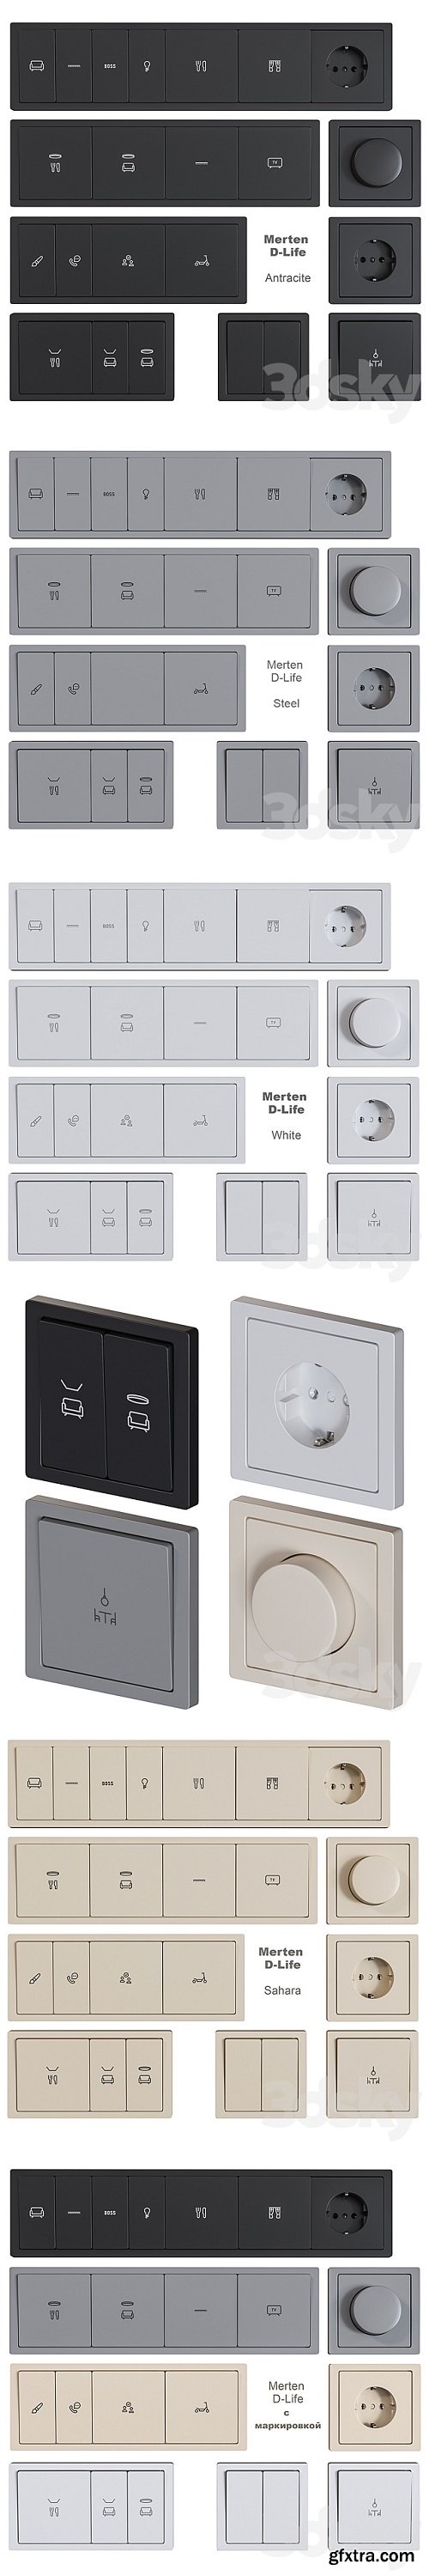 Schneider Electric sockets and switches with markings